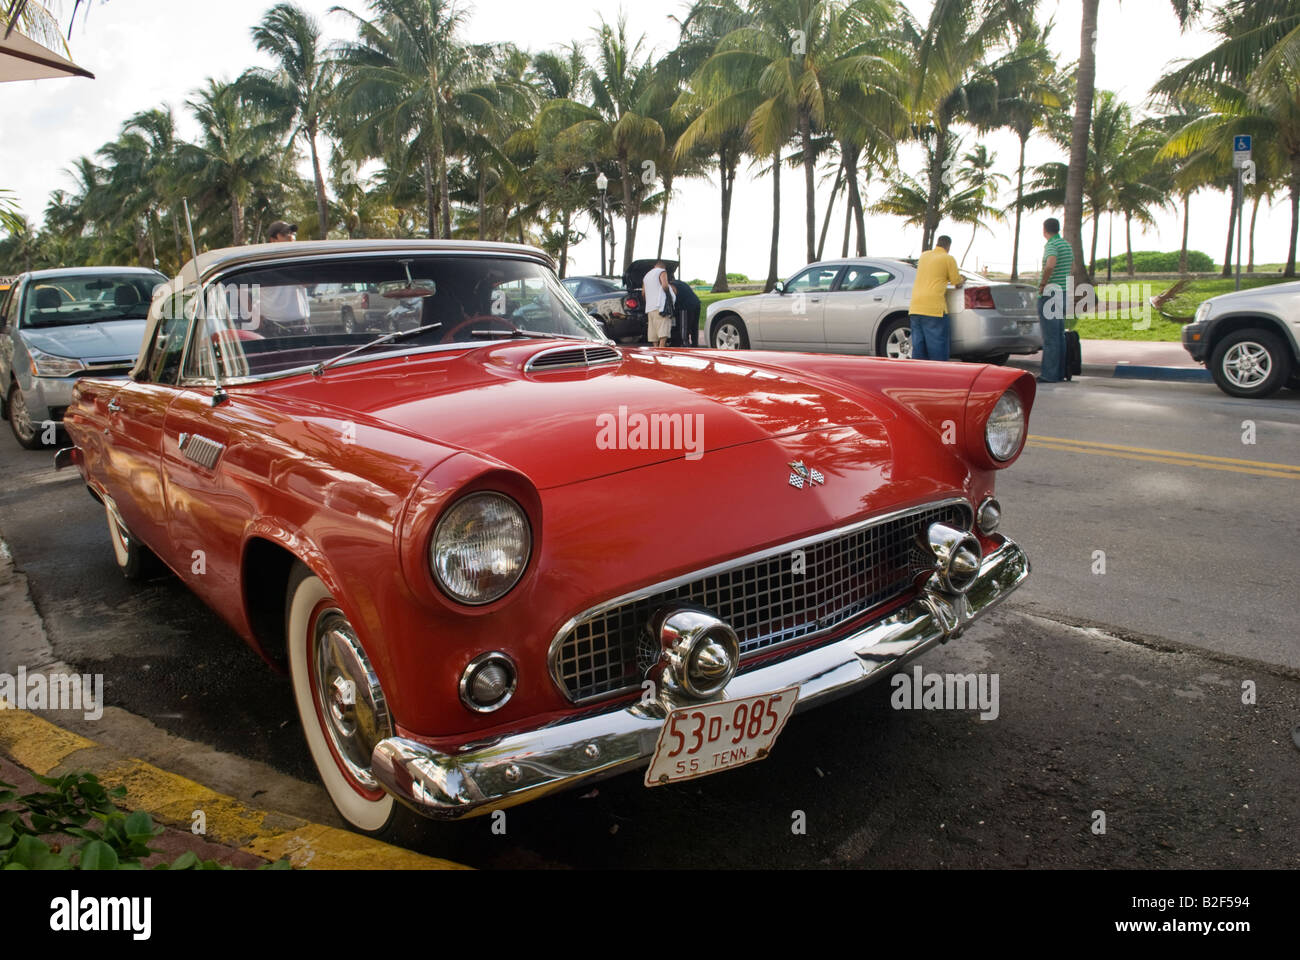 Vintage Car Outside the Avalon Hotel in South Beach Miami Stock Photo